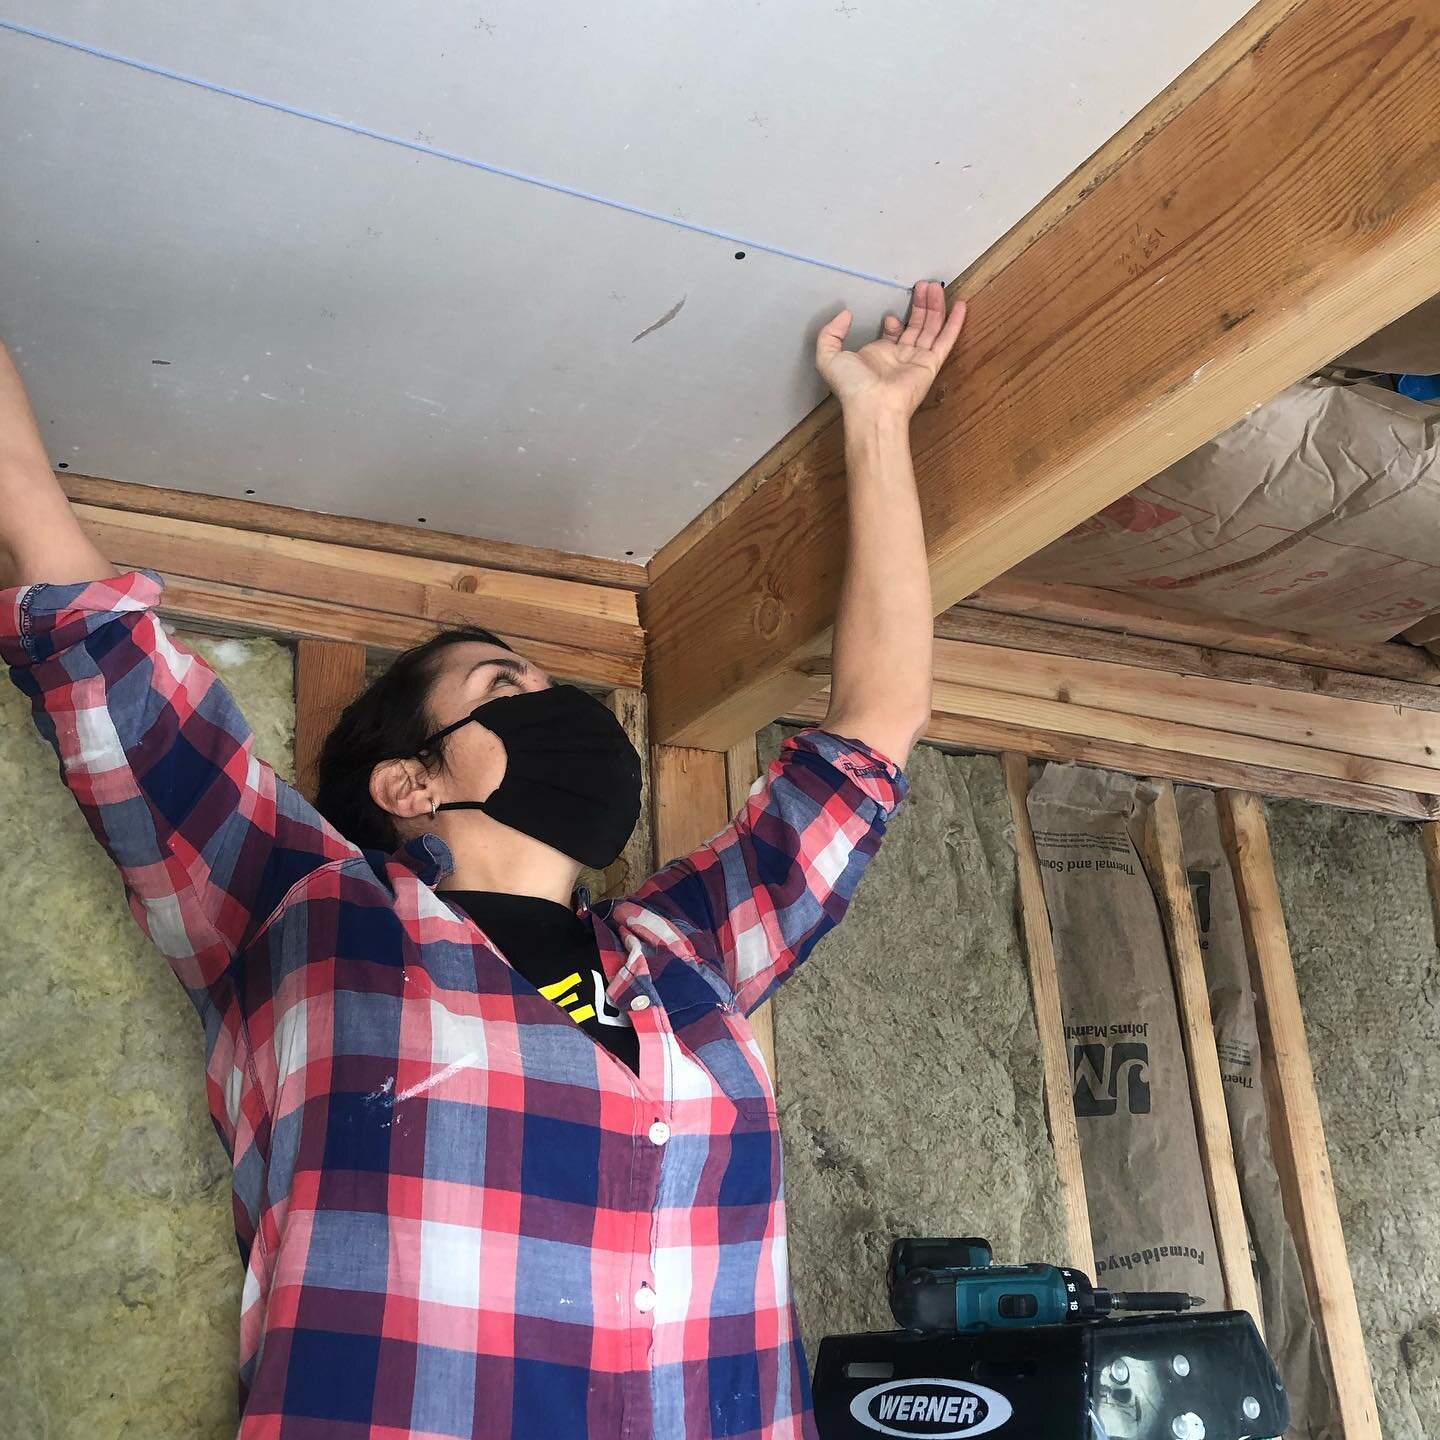 Drywall! Yes it&rsquo;s heavy, but as a team we installed the ceiling in our tiny house with ease.